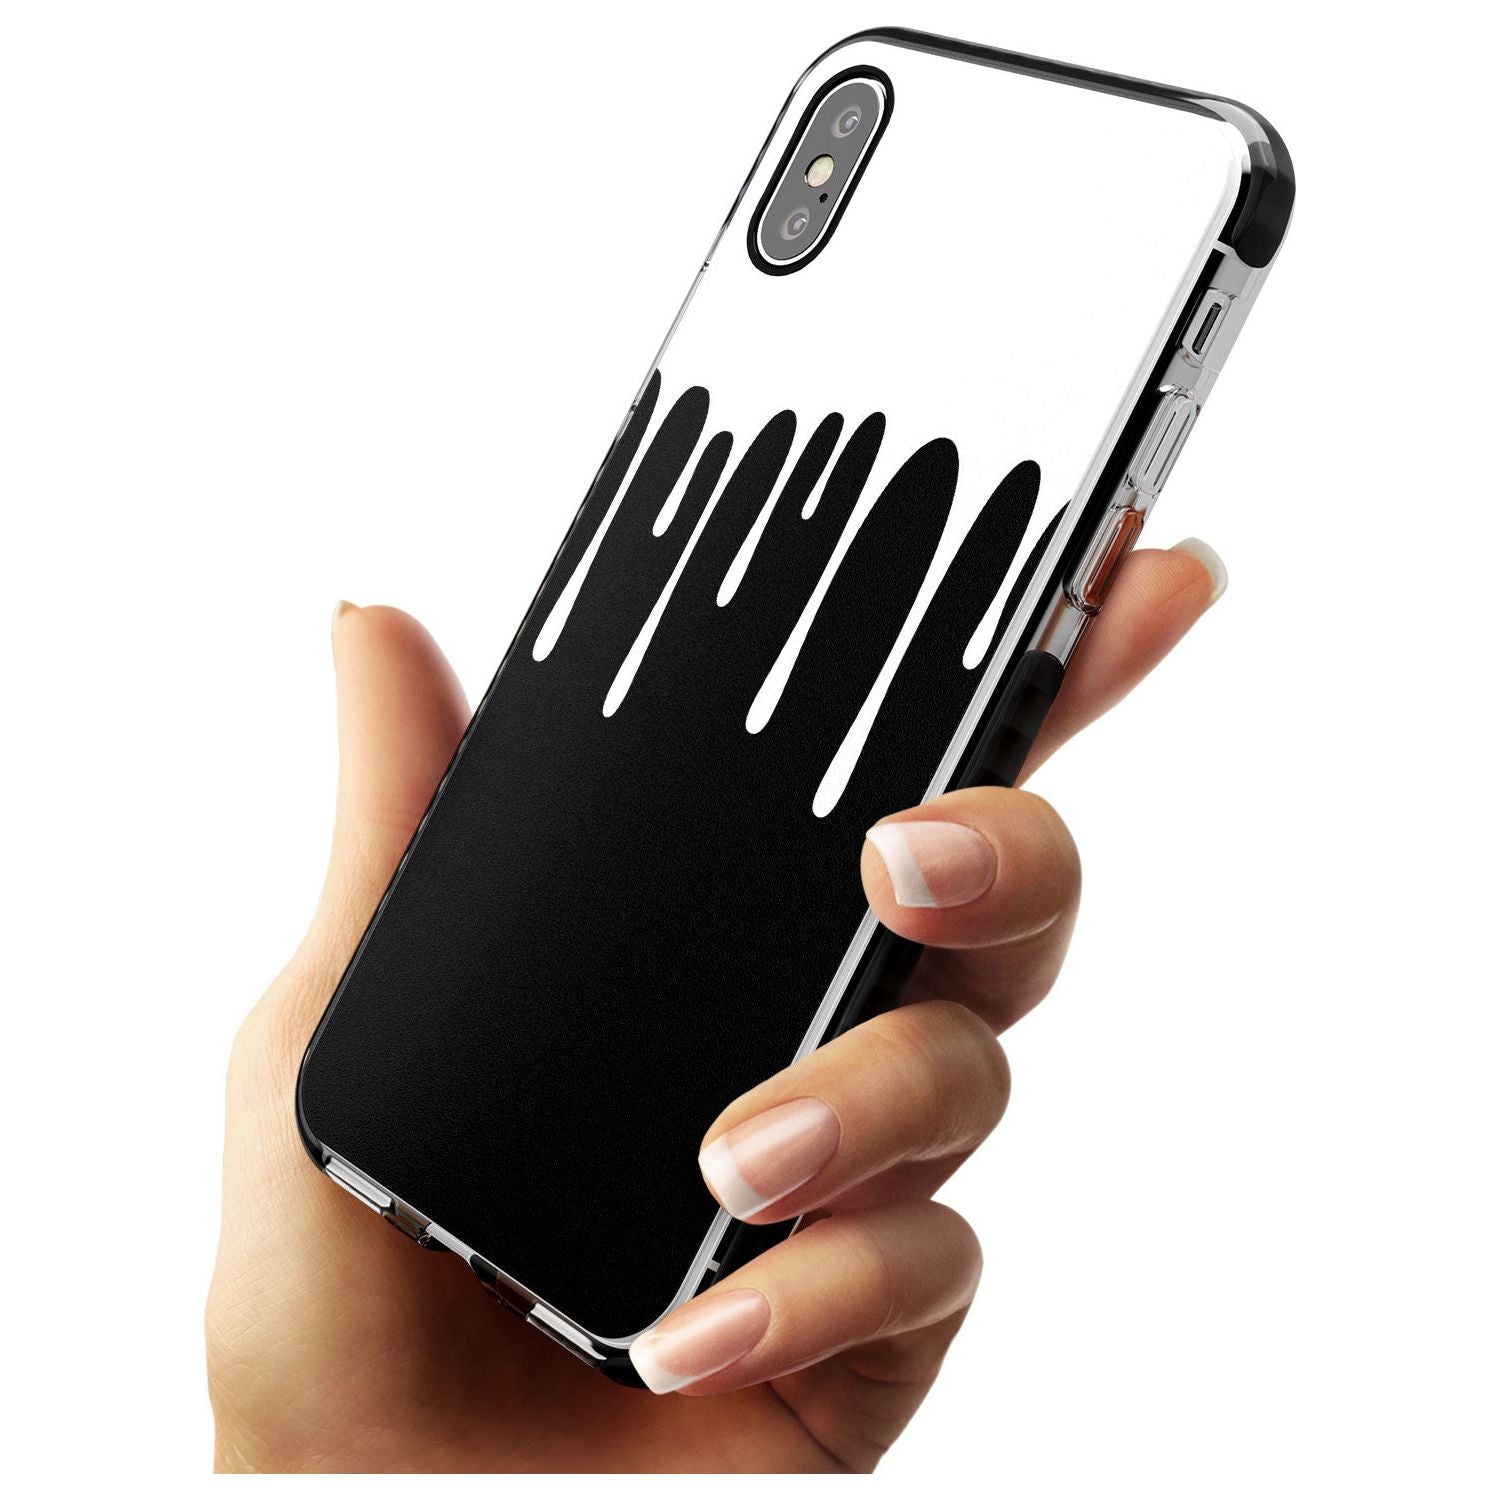 Melted Effect: White & Black iPhone Case Black Impact Phone Case Warehouse X XS Max XR